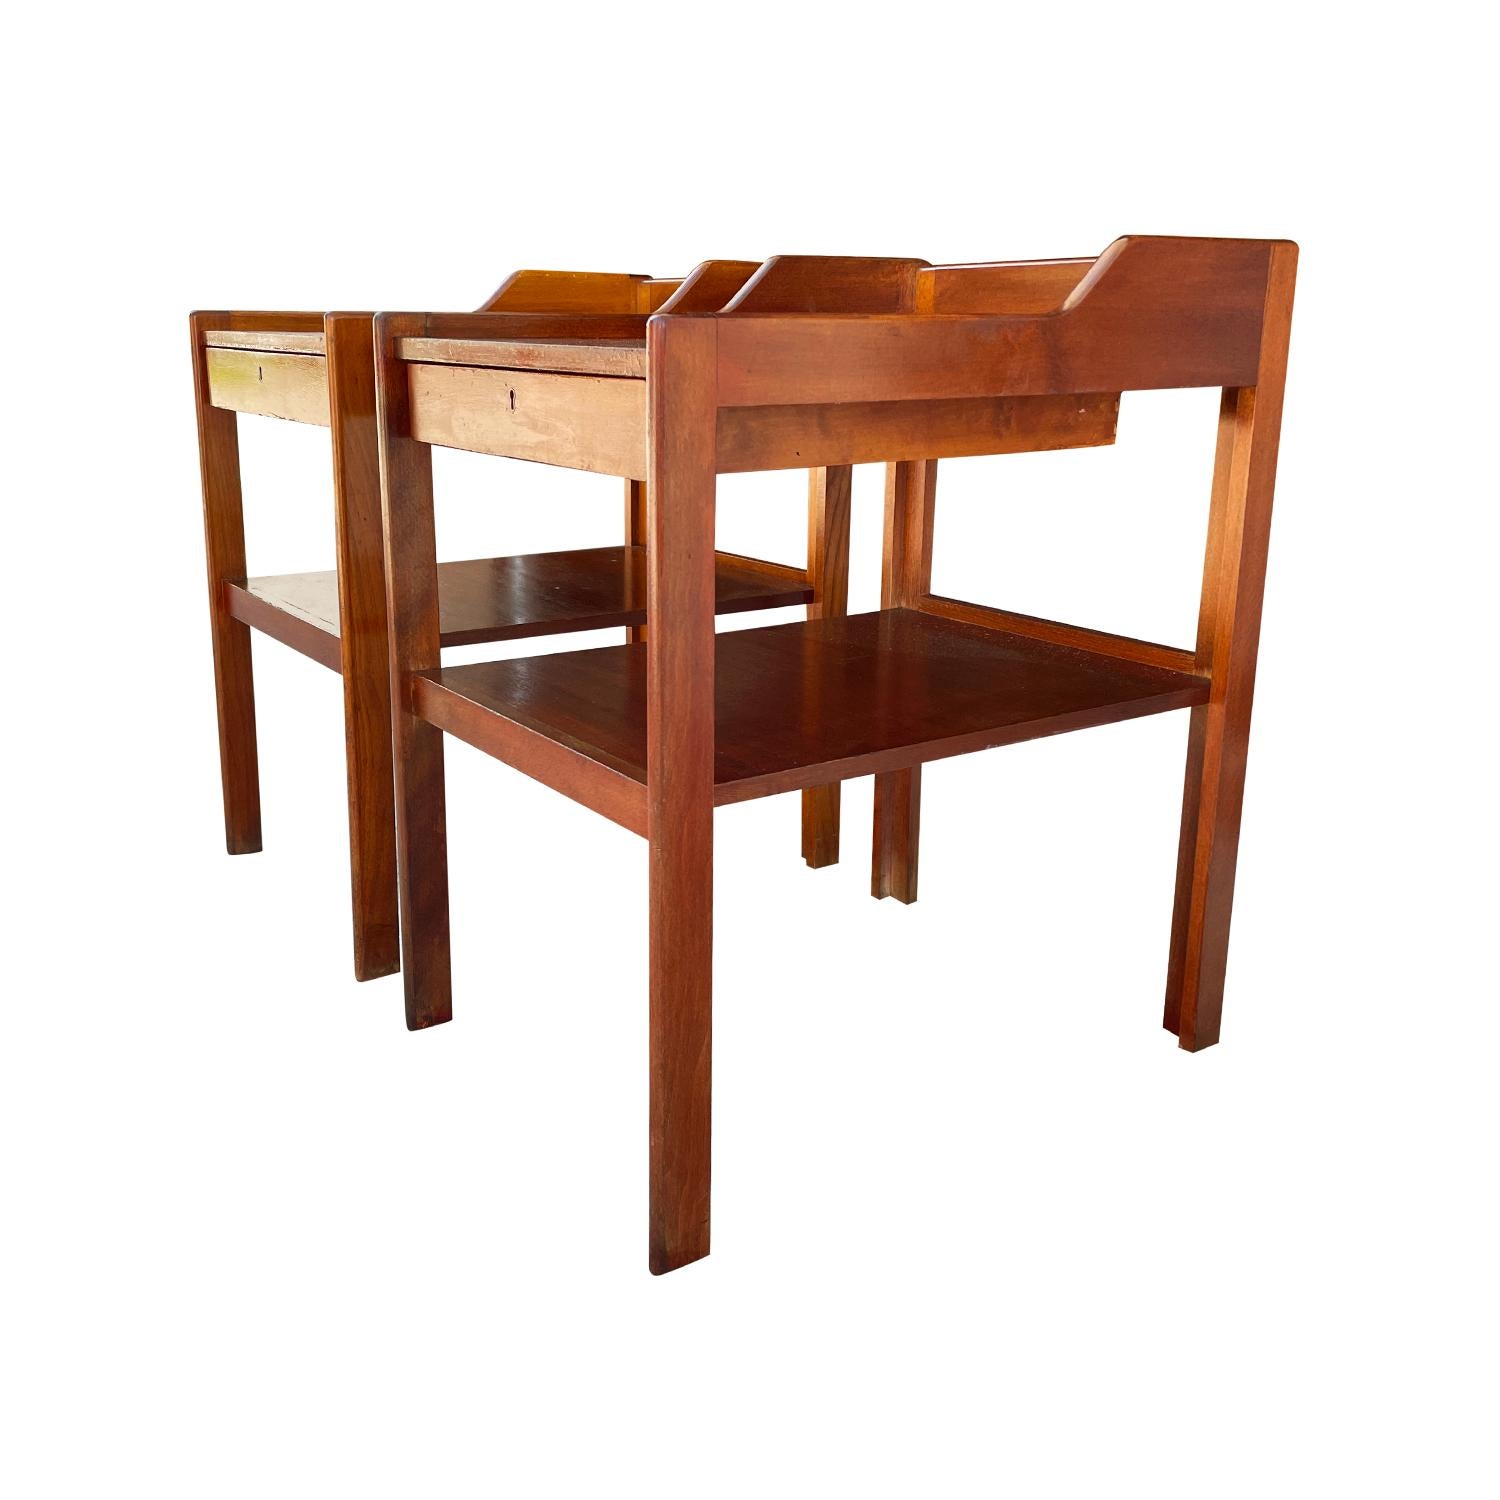 20th Century Swedish Mahogany Nightstands, Bedside Tables by Carl-Axel Acking 1